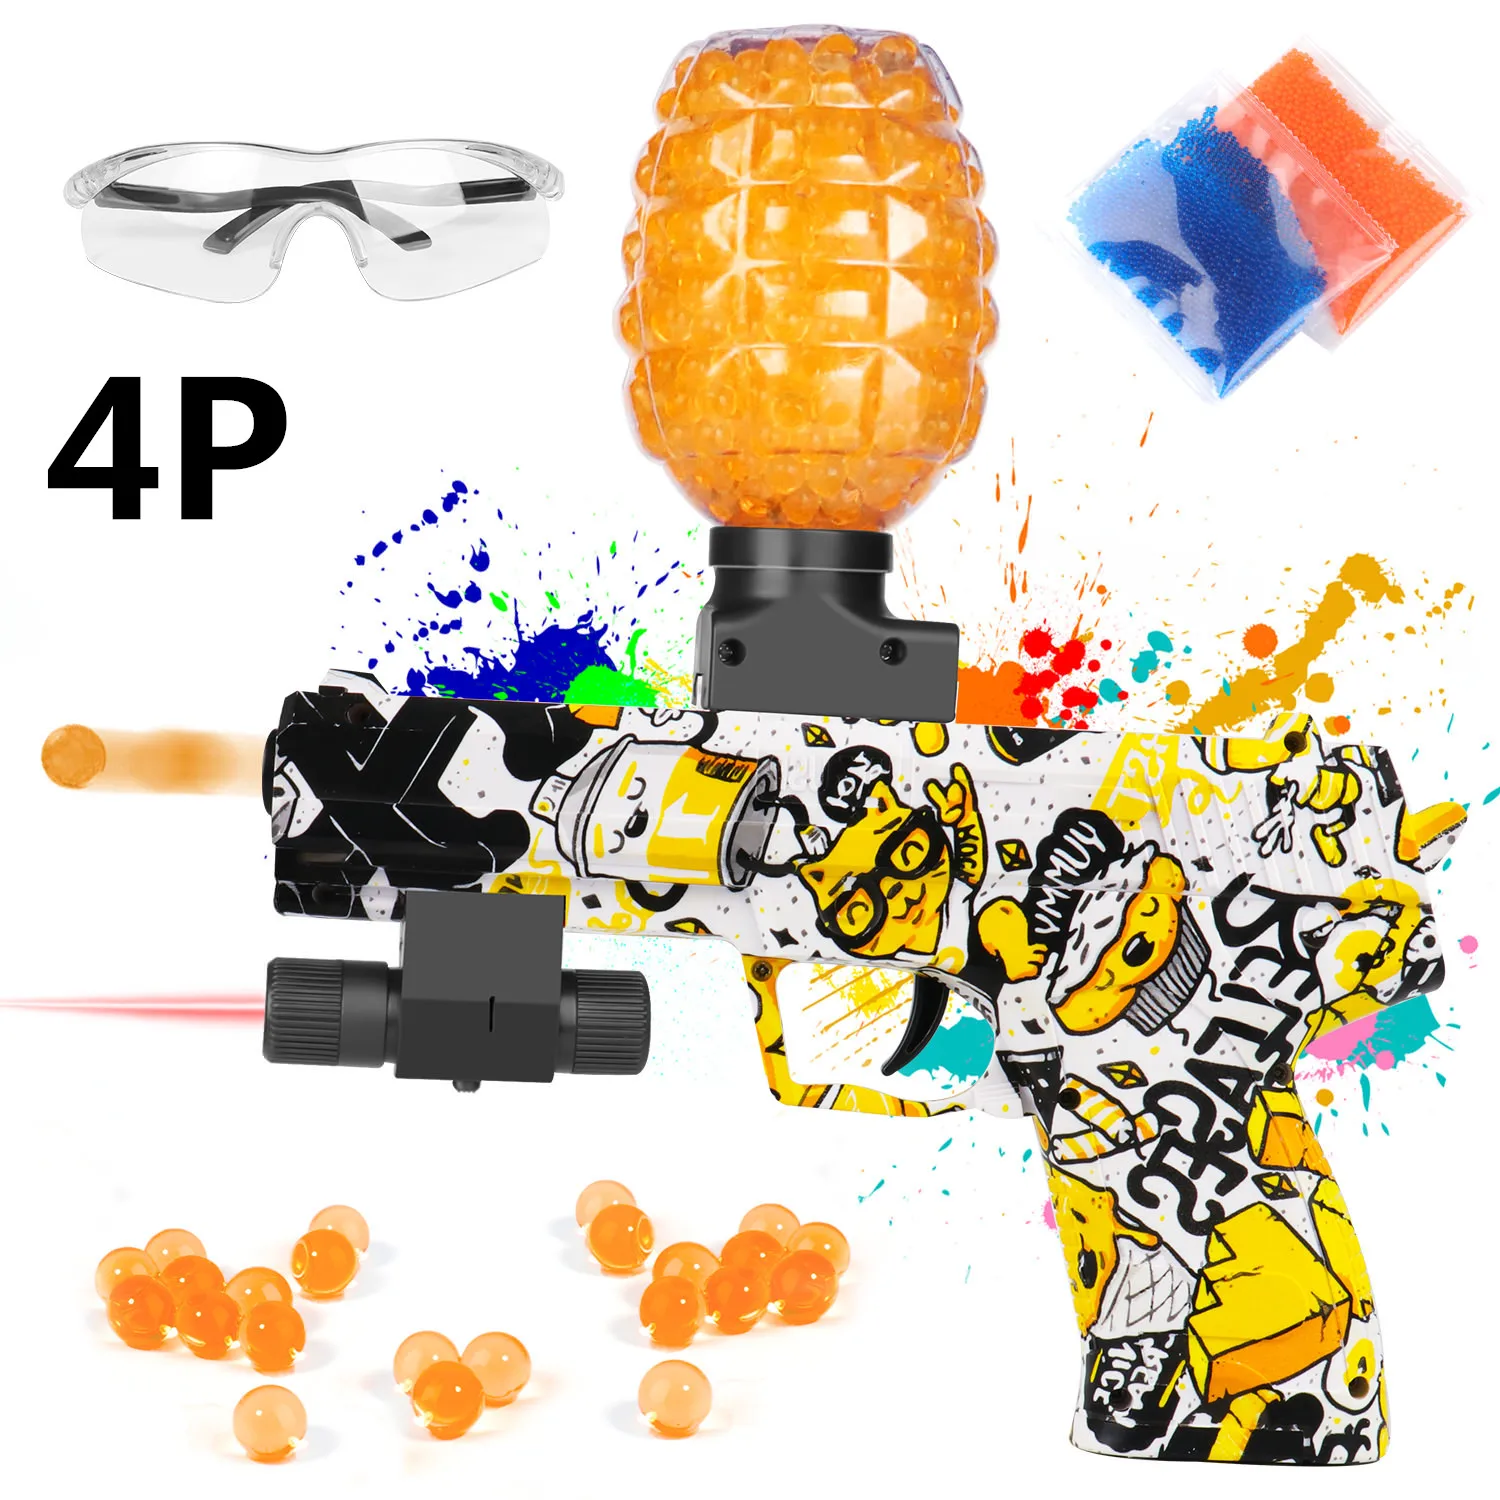 

4Pack Electric Gel Ball Blaster - ferventoys Splatter Ball Gun with 40000 Water Balls and Goggles (Yellow),4Pcs